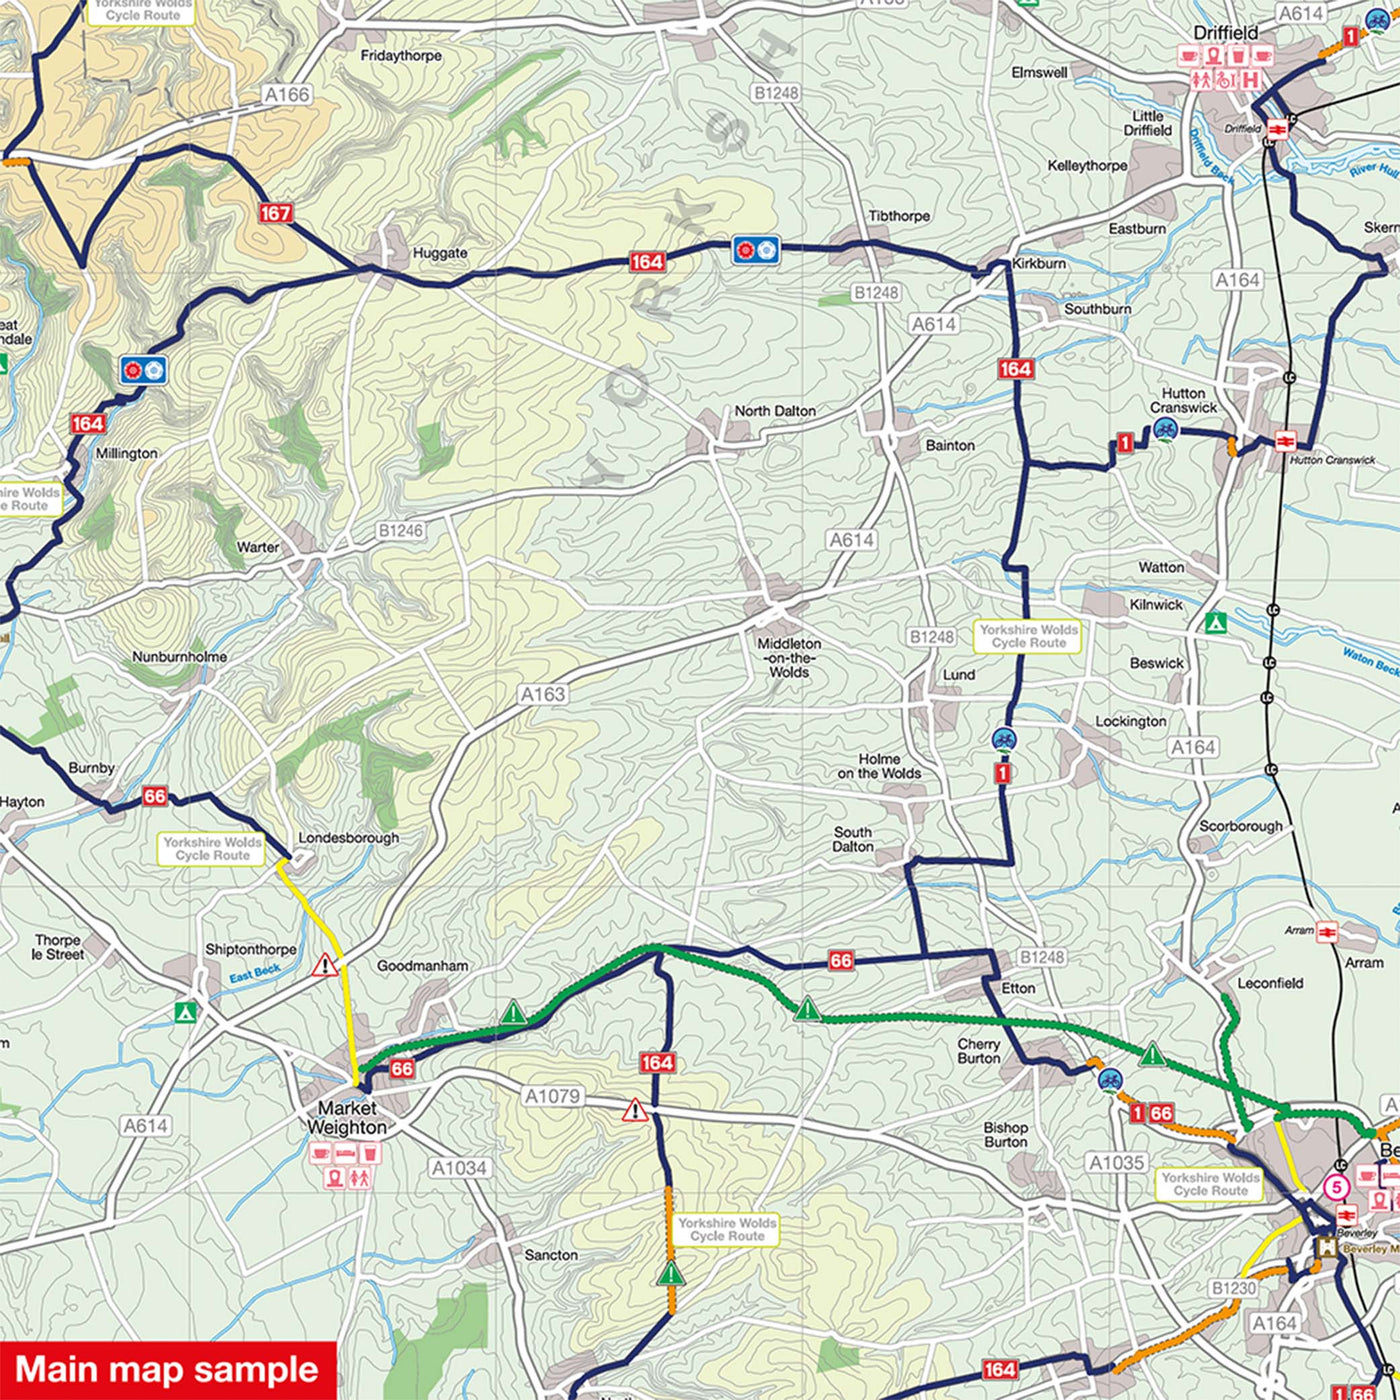 Main map sample for the Yorkshire Wolds, York and the Humber cycle map